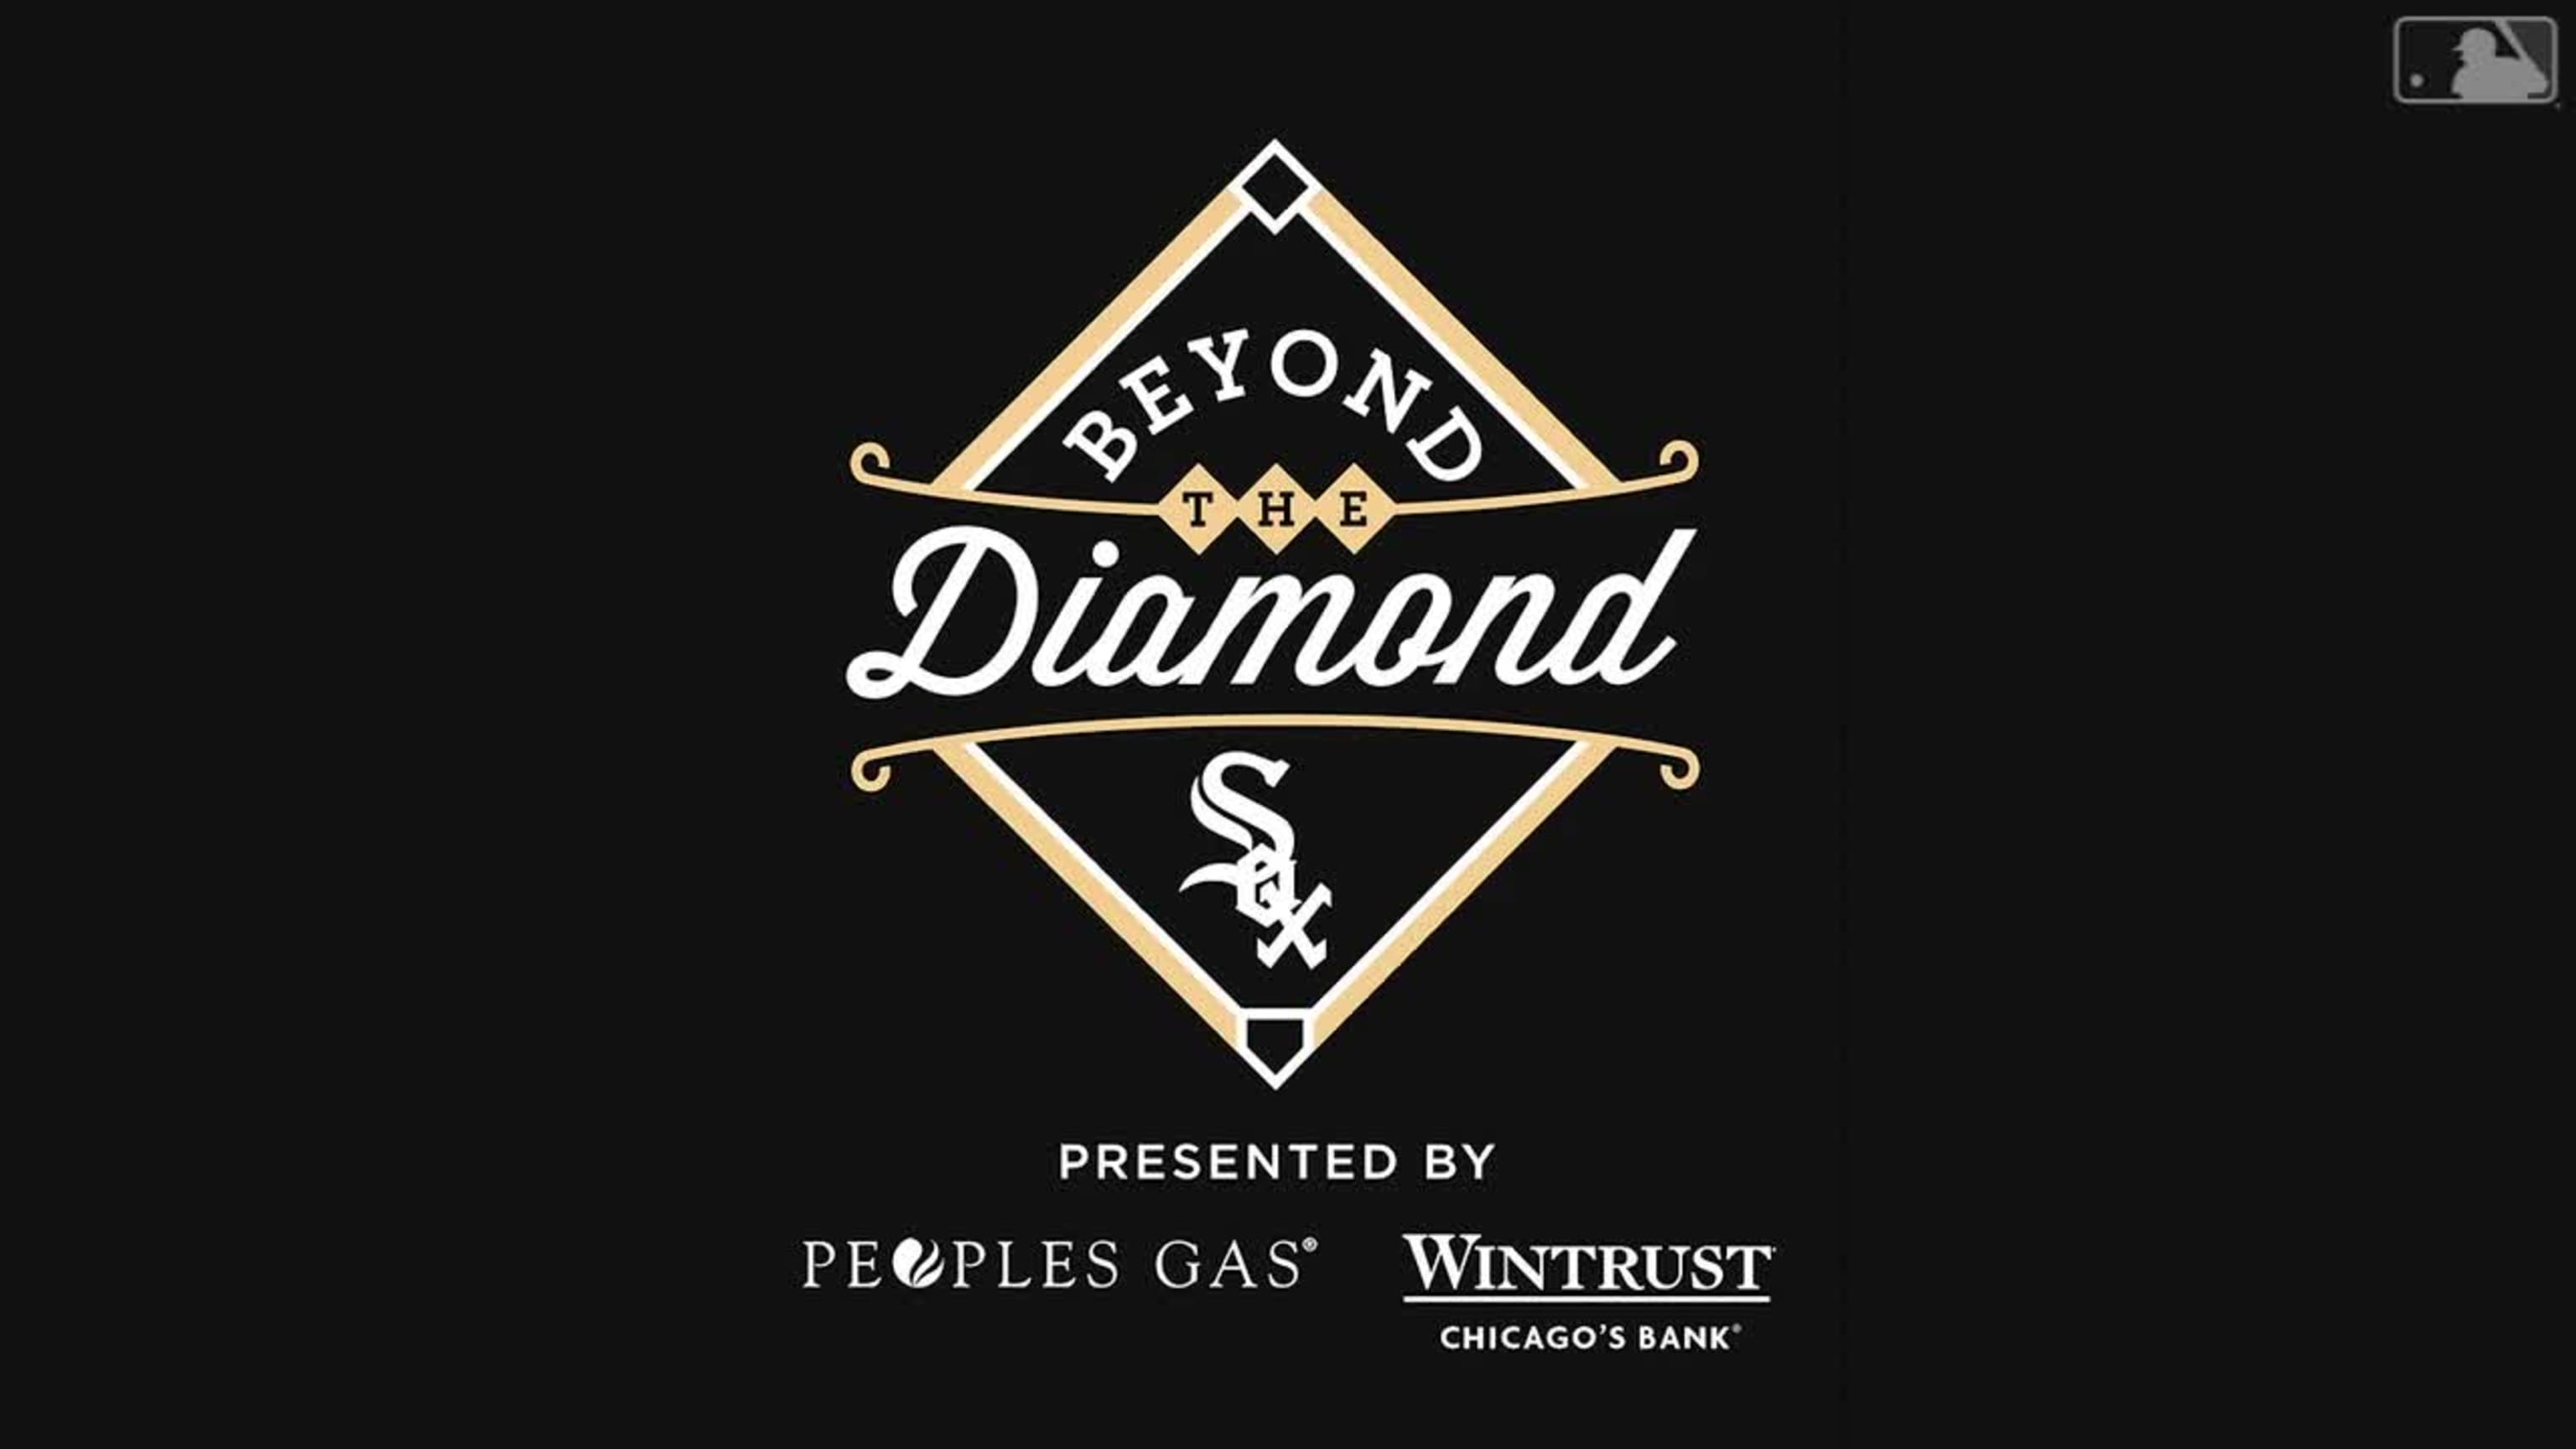 White Sox Charities Day returns to Guaranteed Rate Field Tuesday – NBC  Sports Chicago